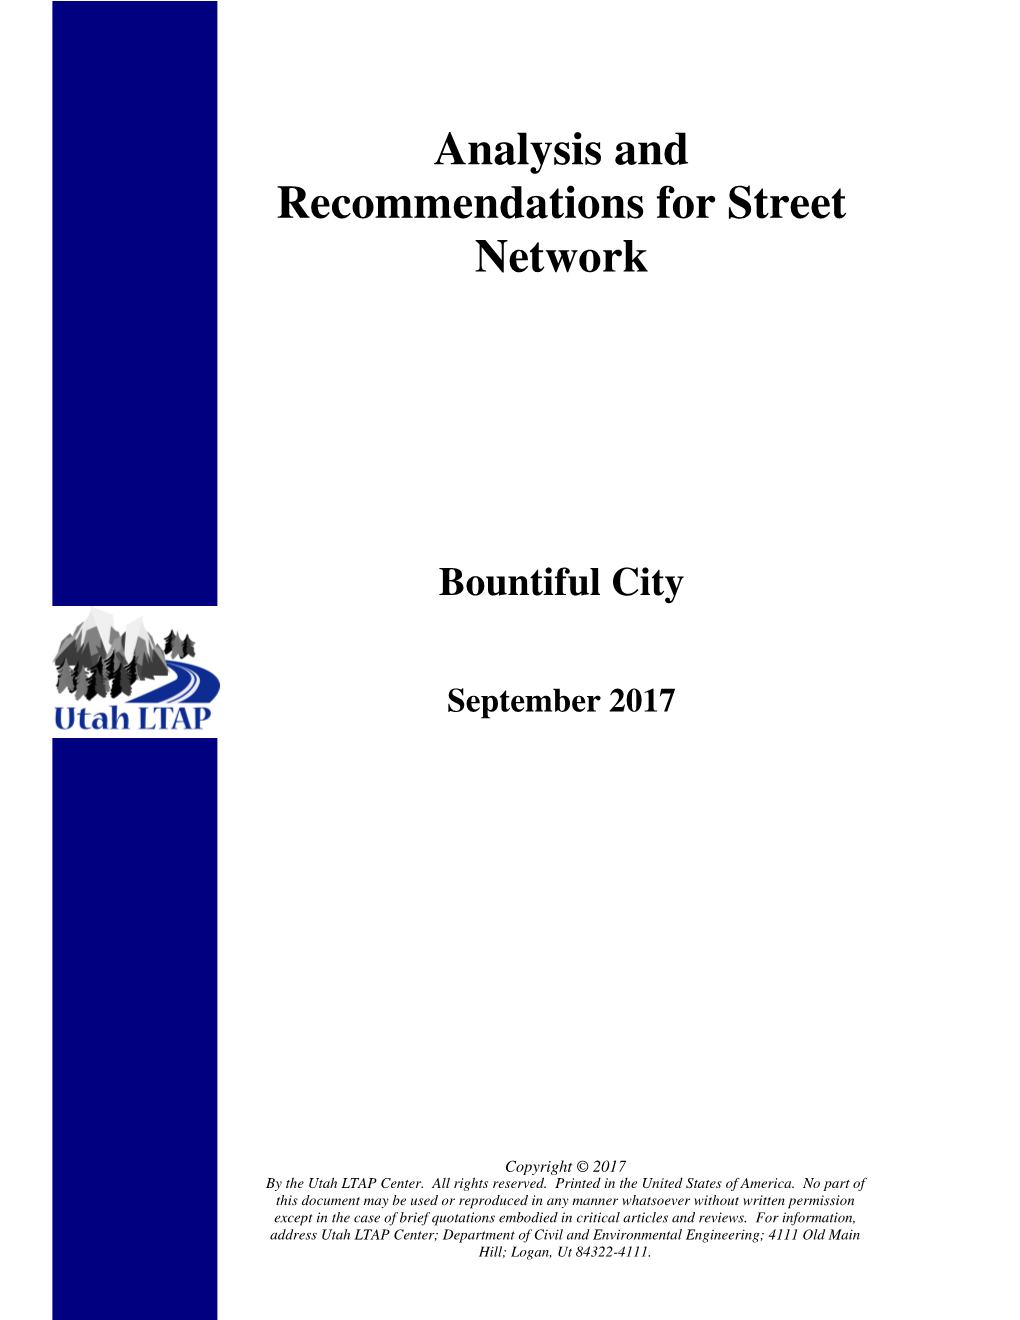 Analysis and Recommendations for Street Network